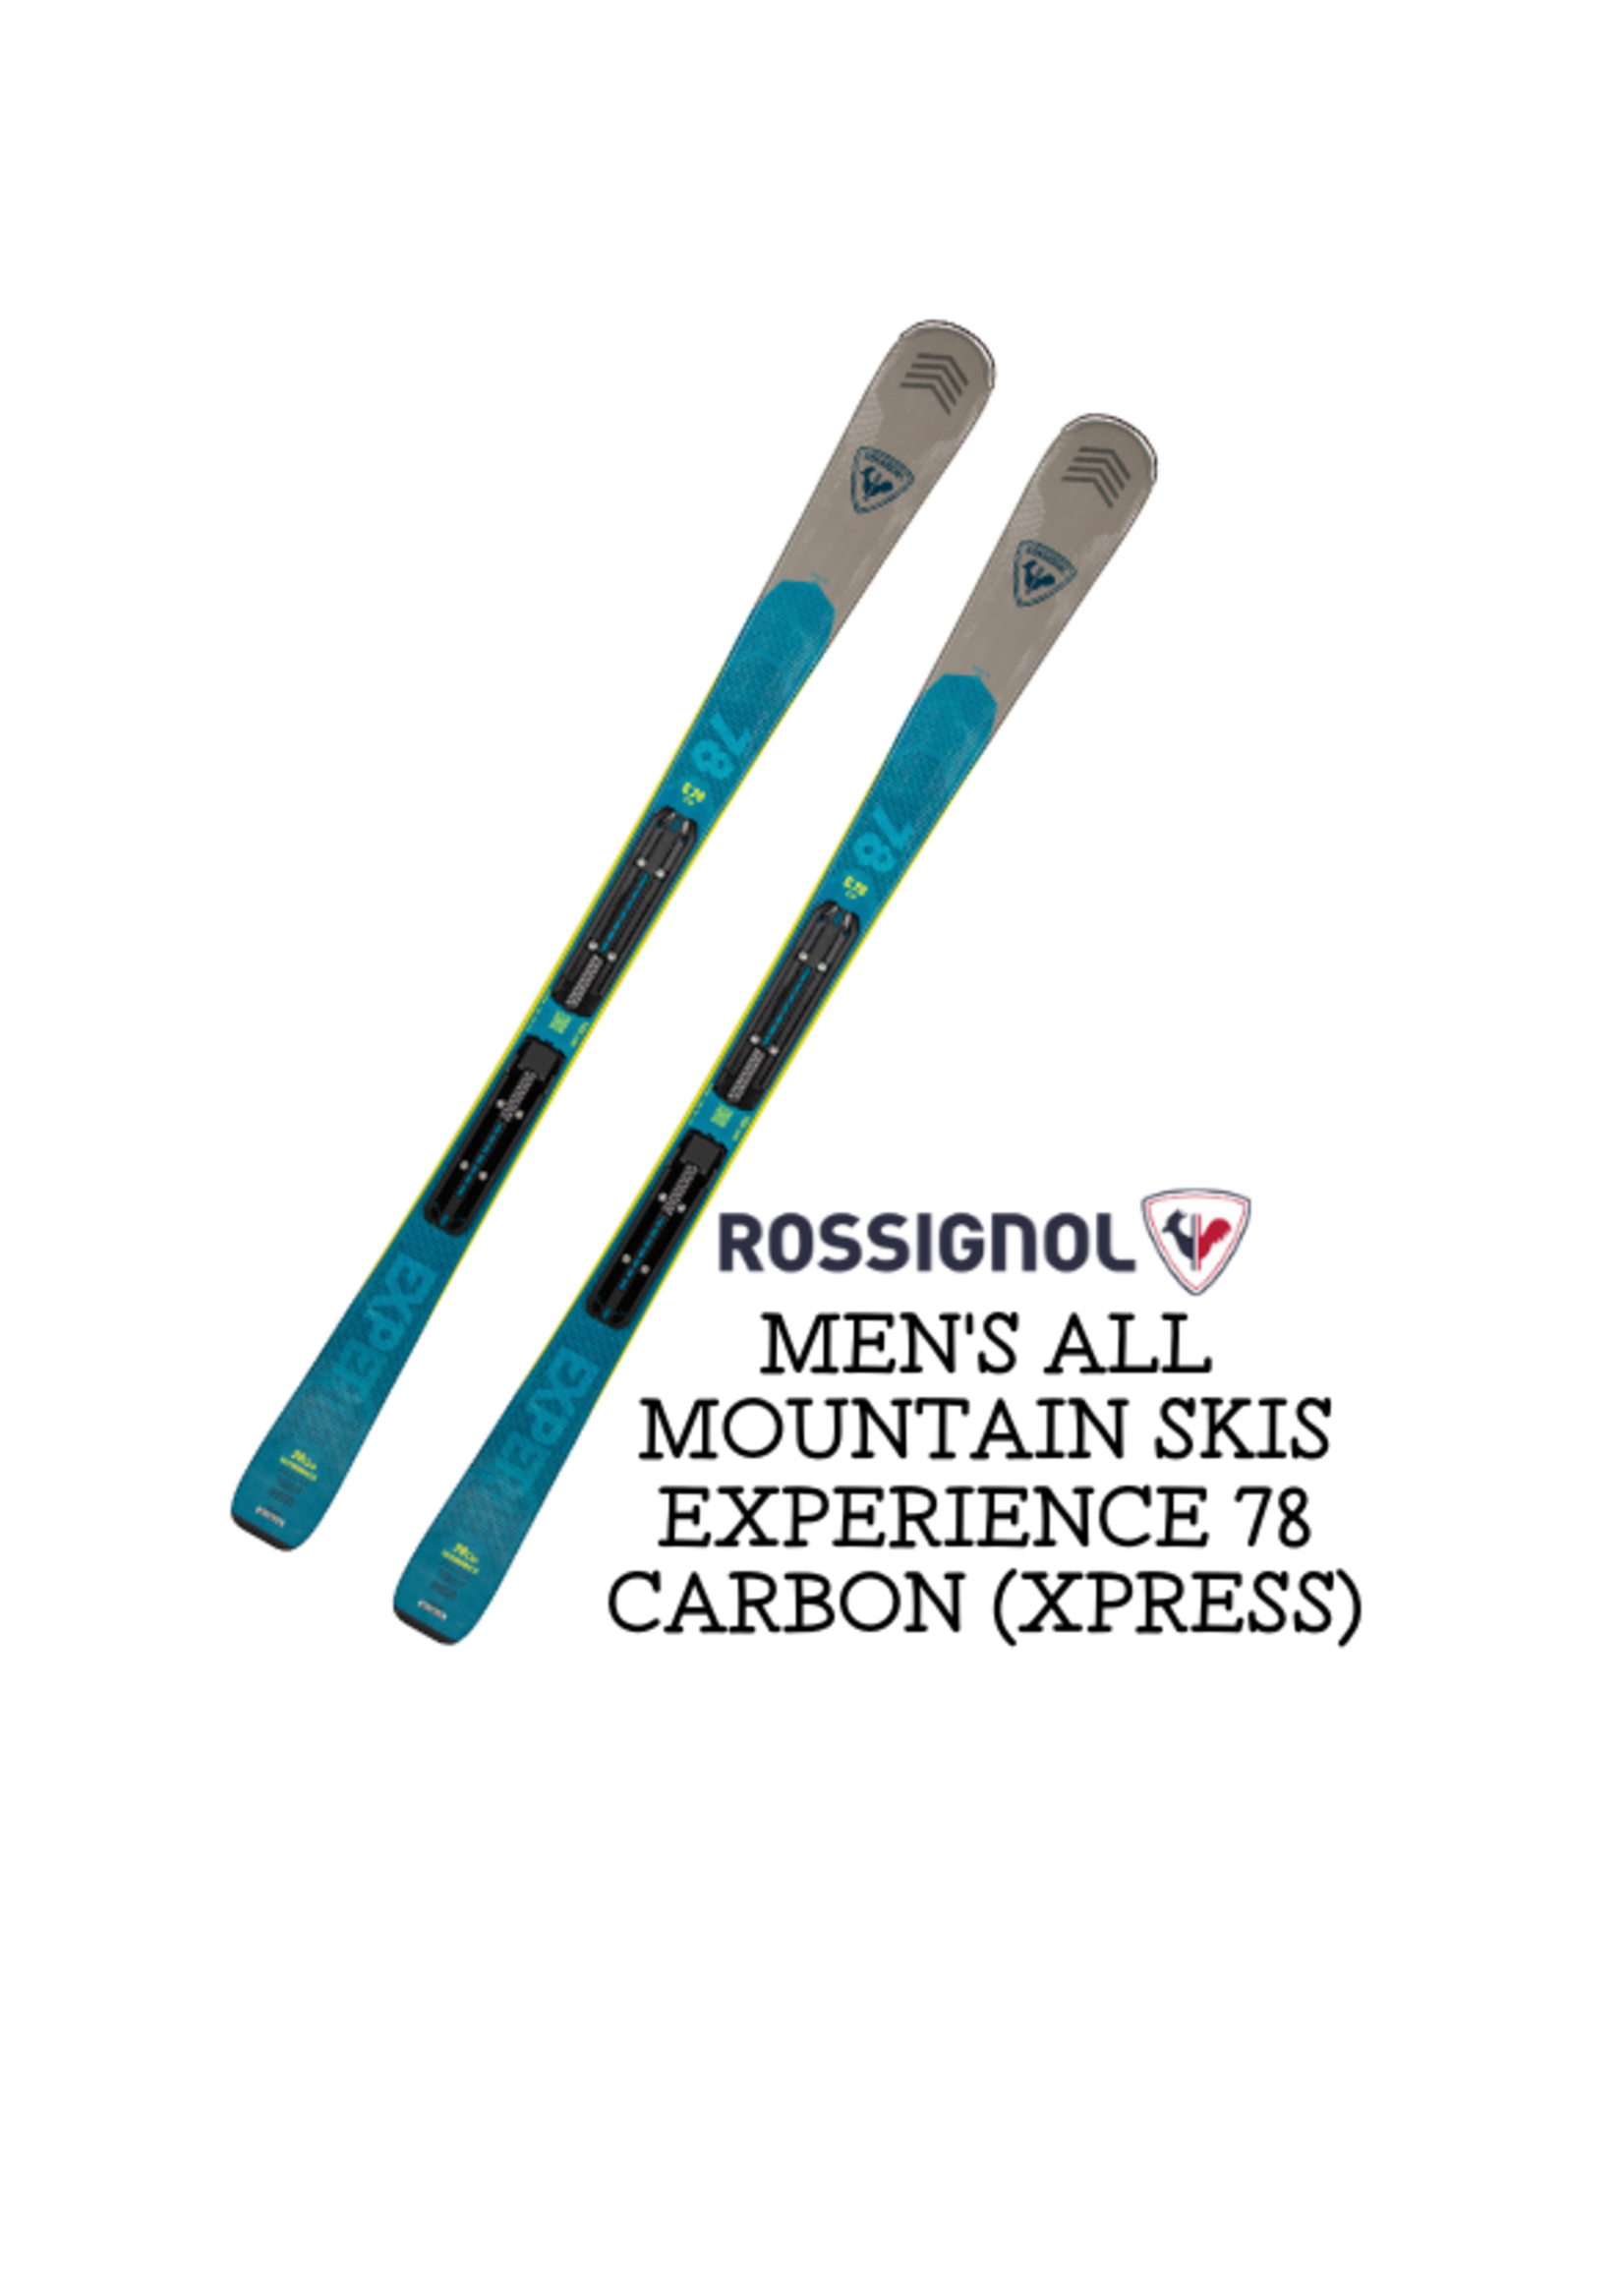 Rossignol Men's ALL MOUNTAIN Skis EXPERIENCE 78 CARBON (XPRESS)